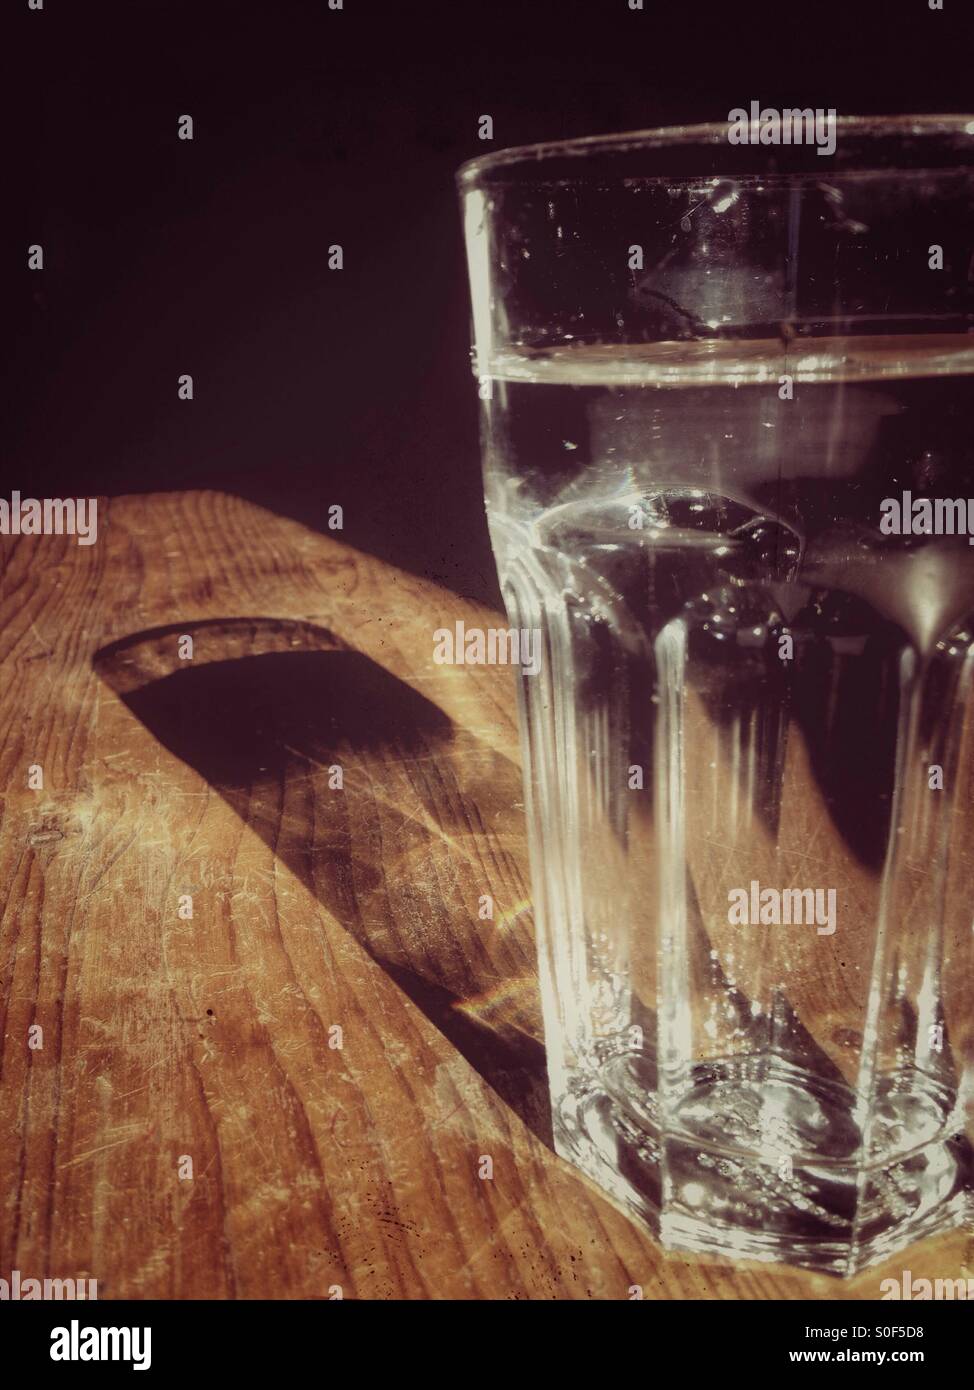 Reflection of a glass of Water on a Wooden Table Stock Photo